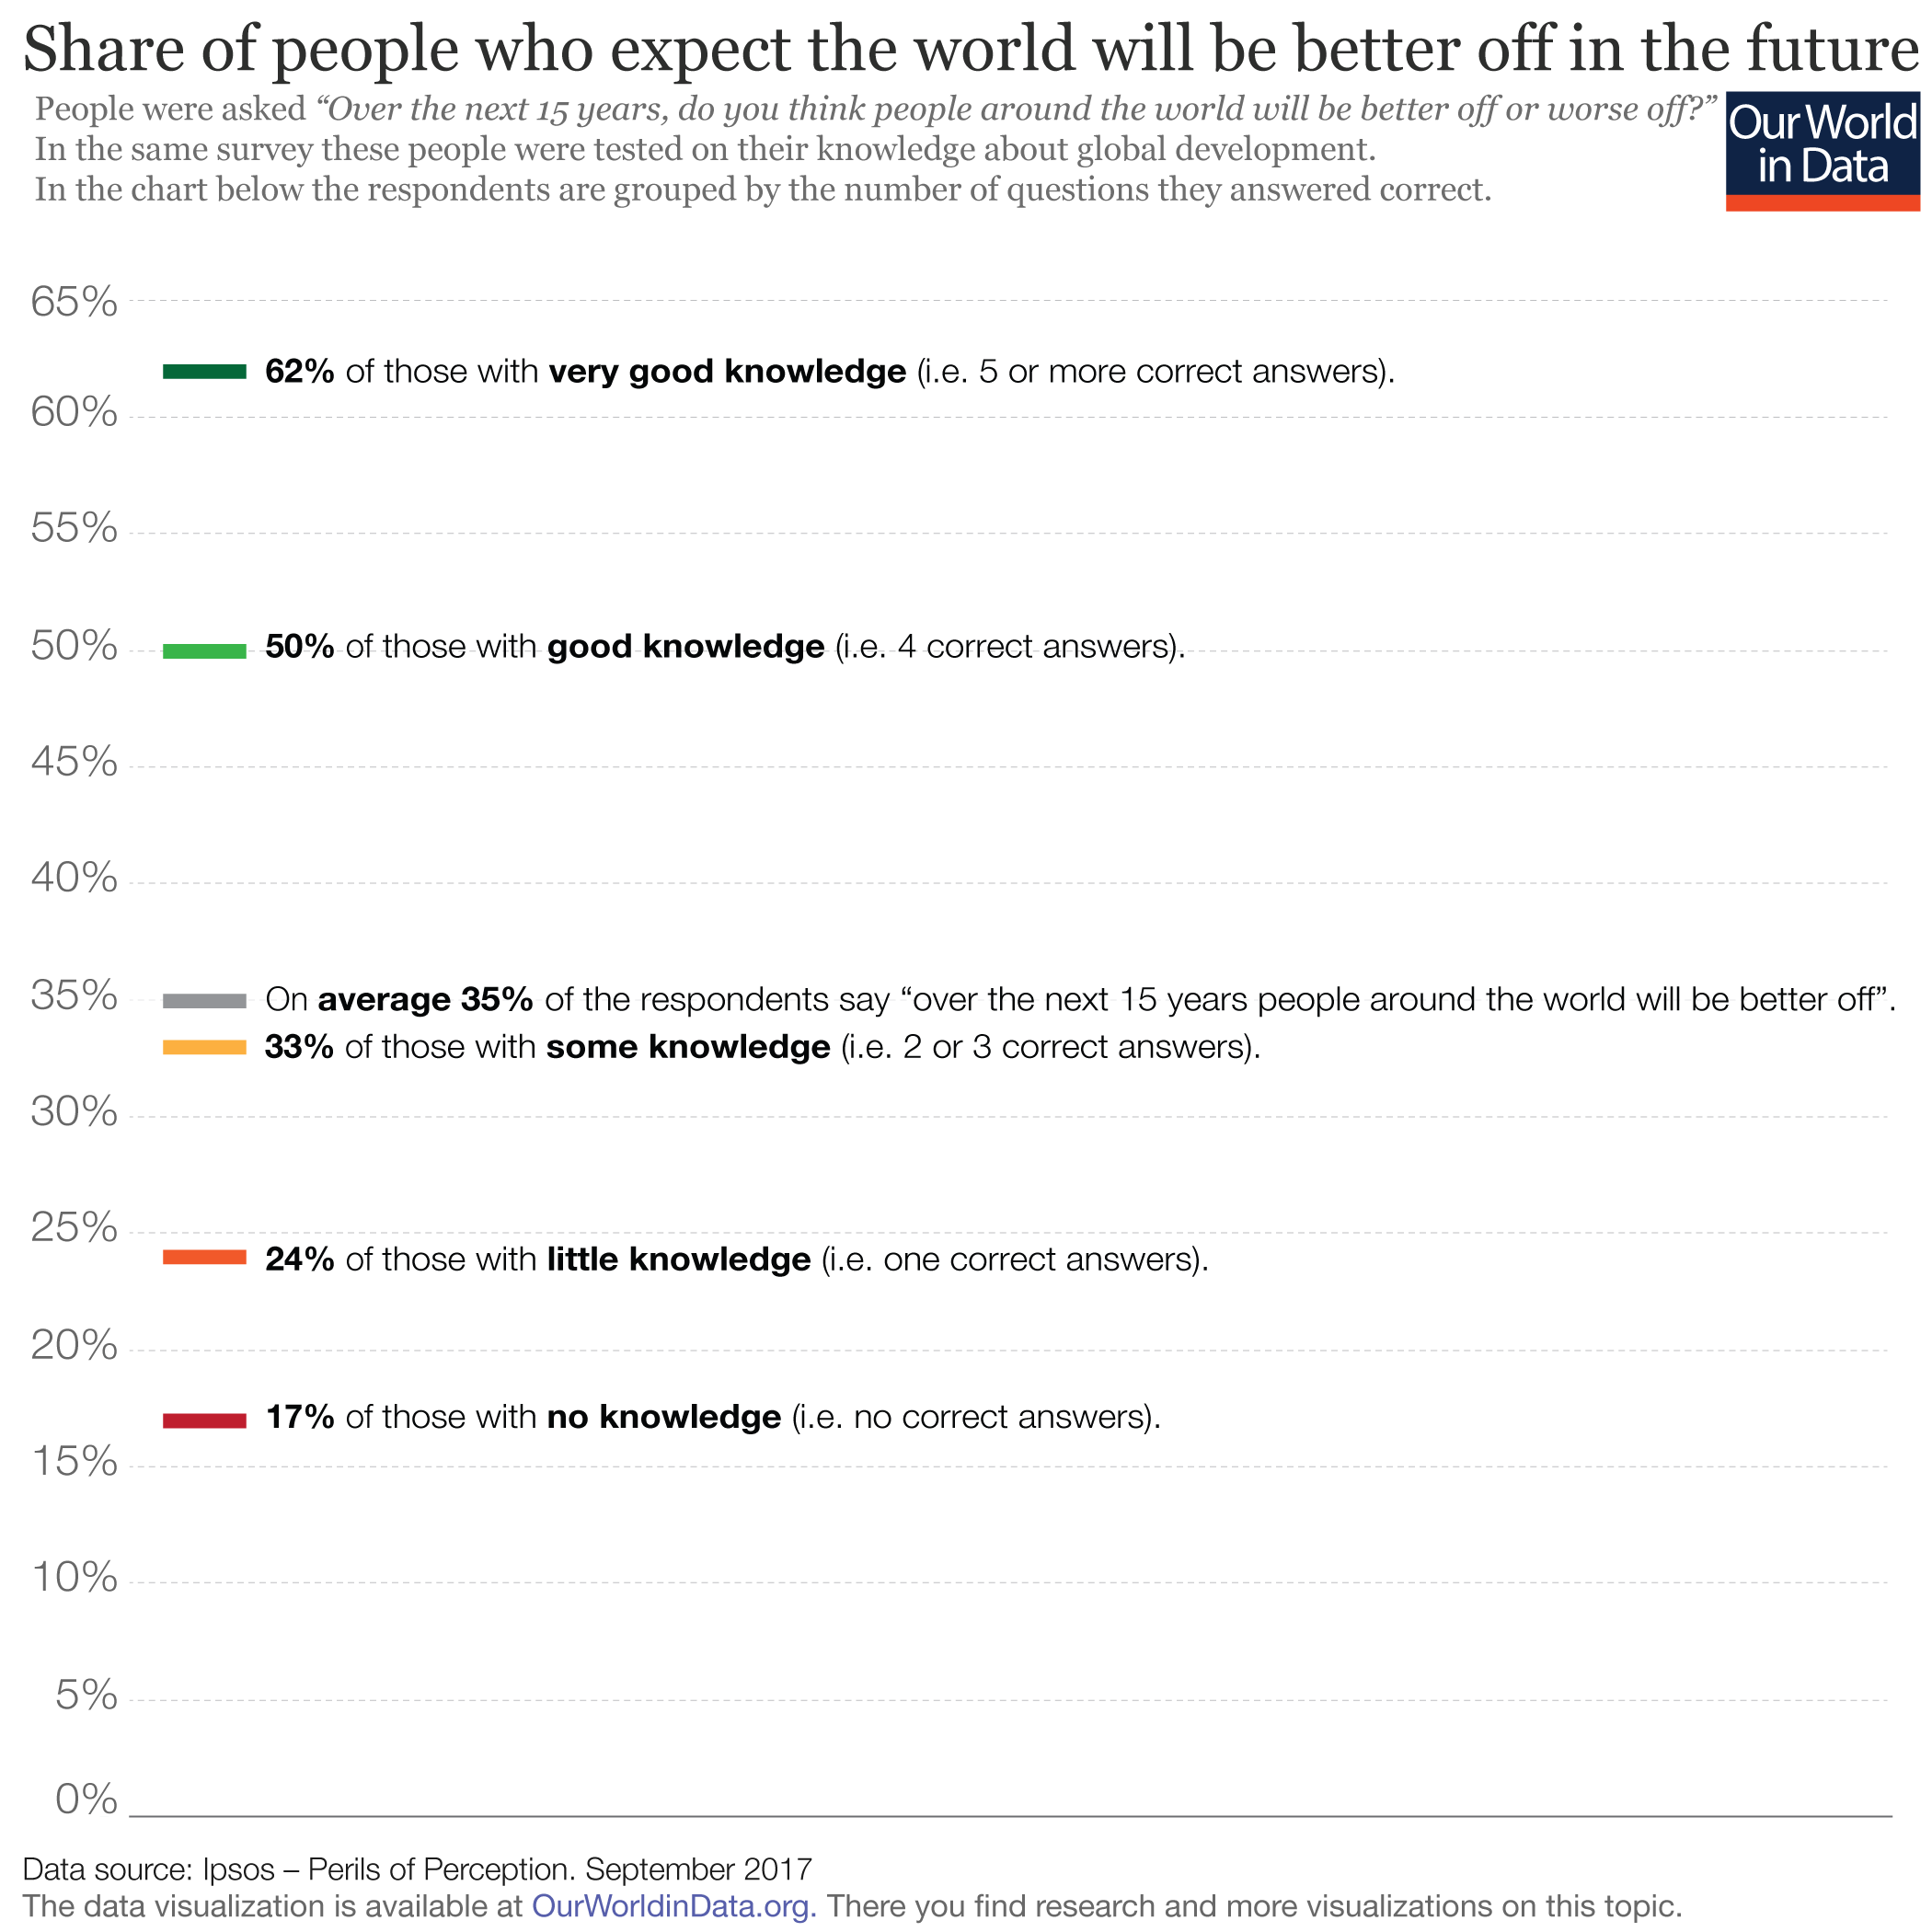 Ladder chart of the share of people that think the future will be better, split by their knowledge of global development which shows that people tend to be more optimistic if they have greater knowledge of past changes.